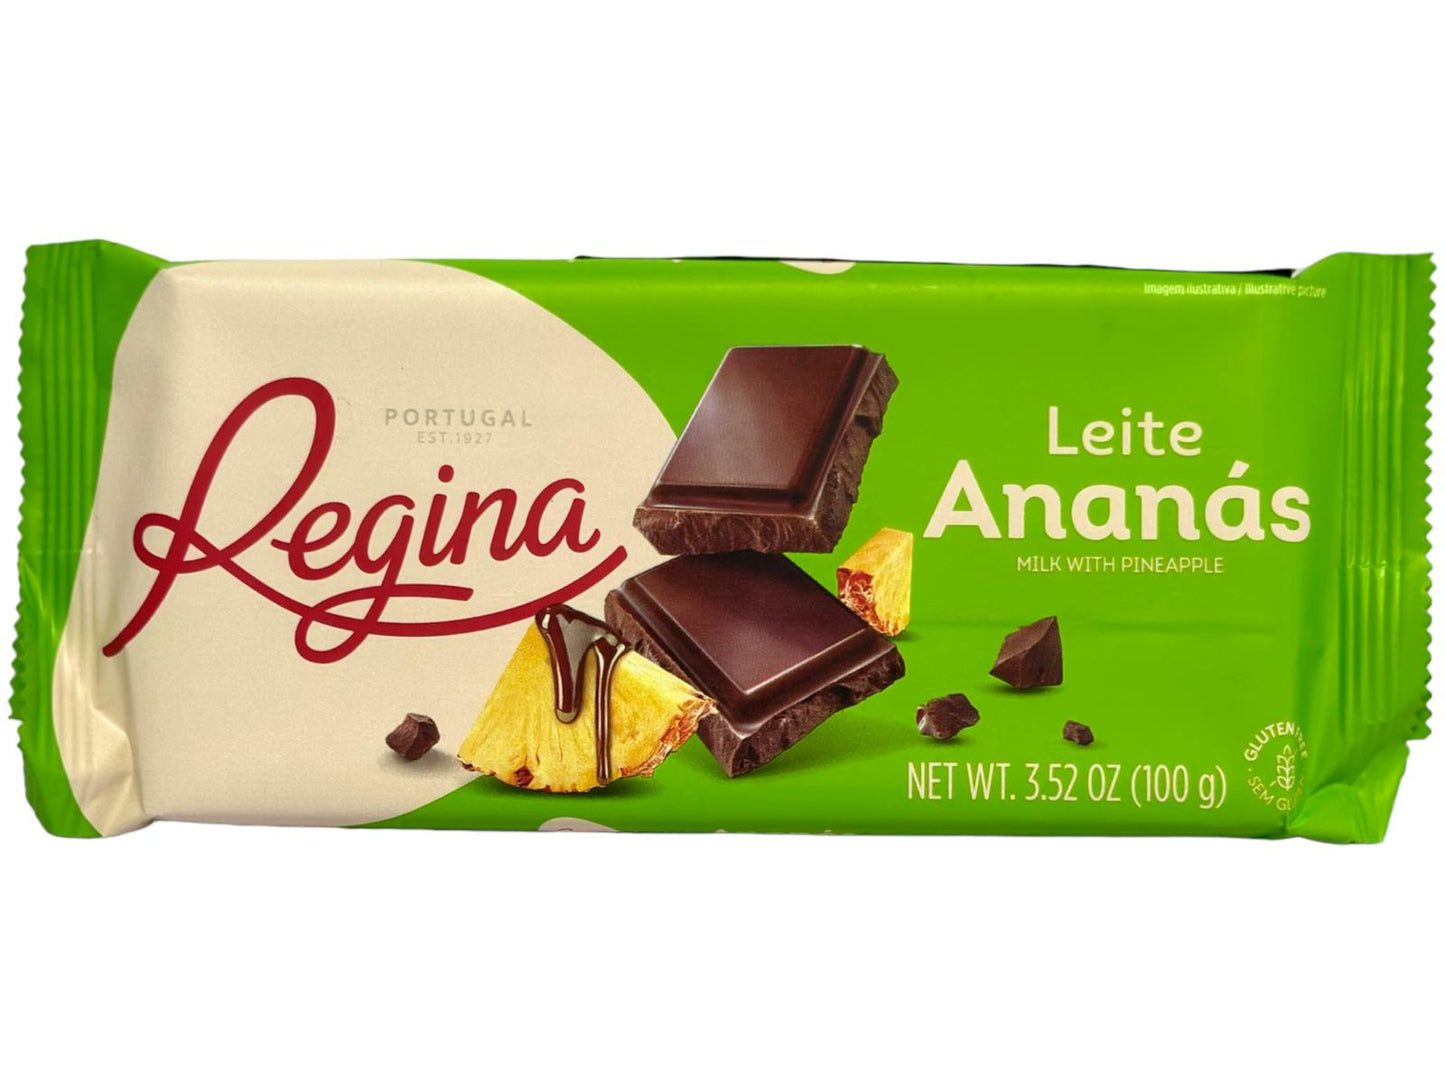 Regina Leite Ananas Portuguese Milk Chocolate with Pineapple 100g - 6 pack 600g total